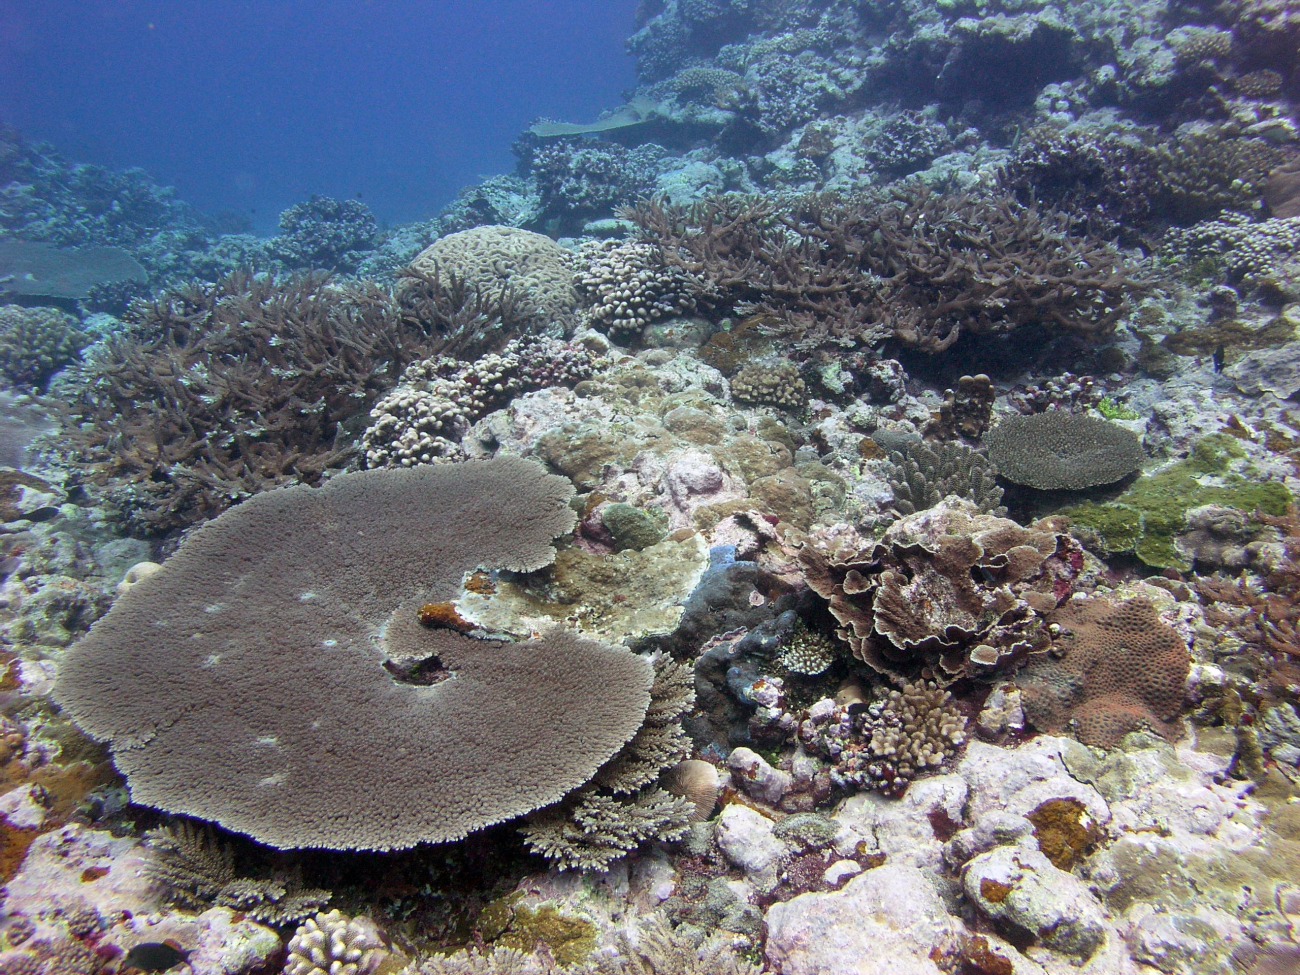 Large tabular coral and numerous other species